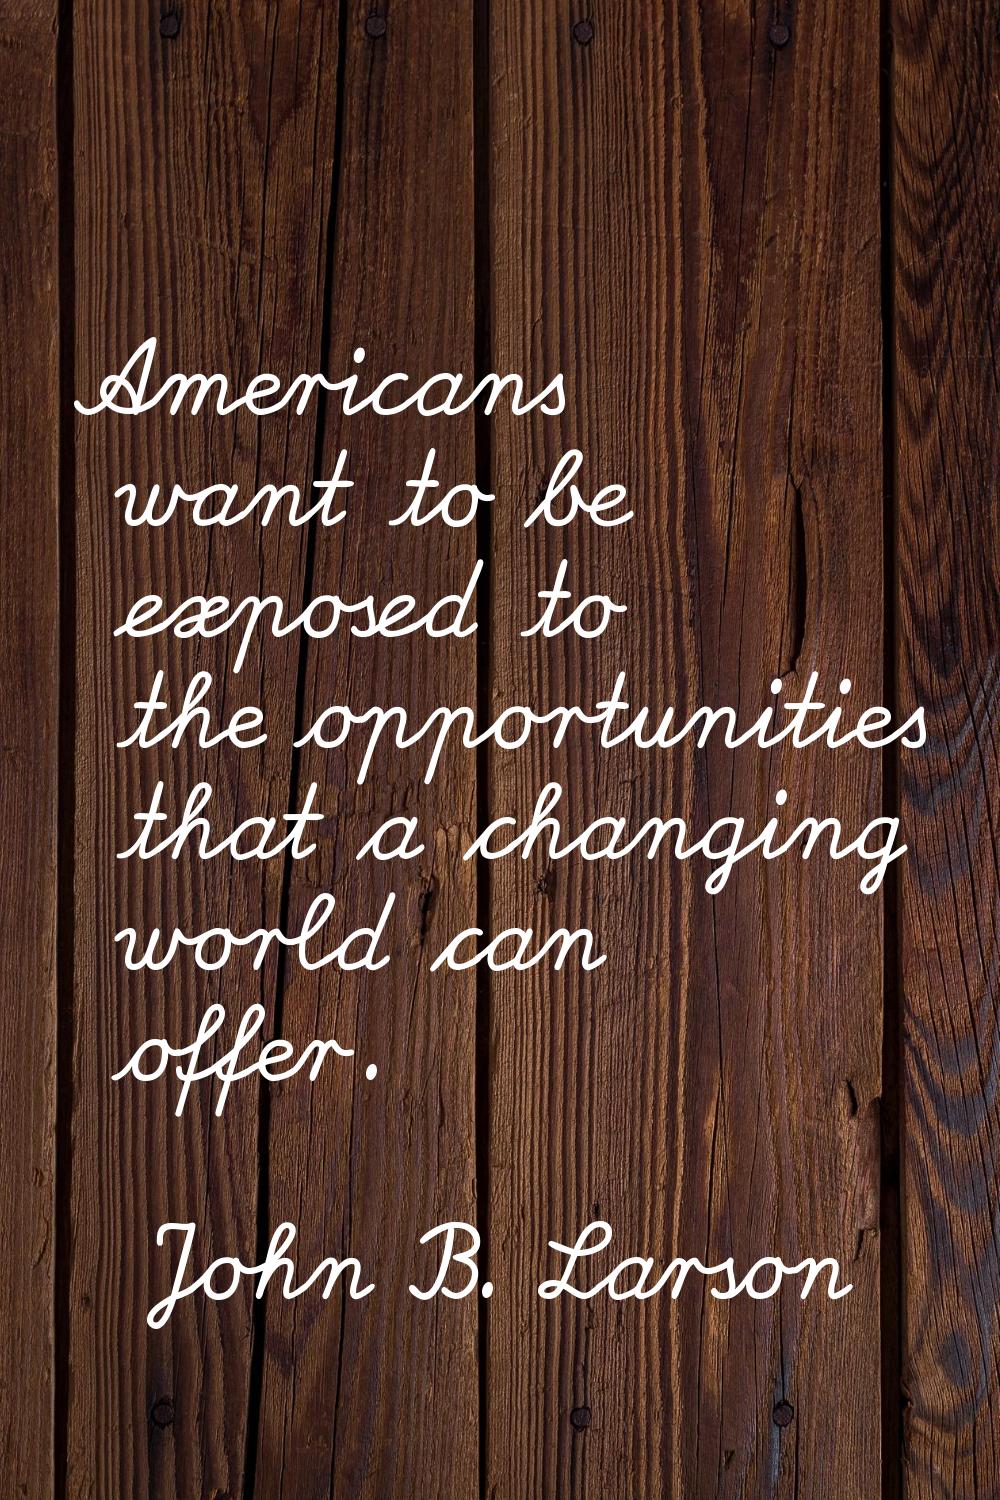 Americans want to be exposed to the opportunities that a changing world can offer.